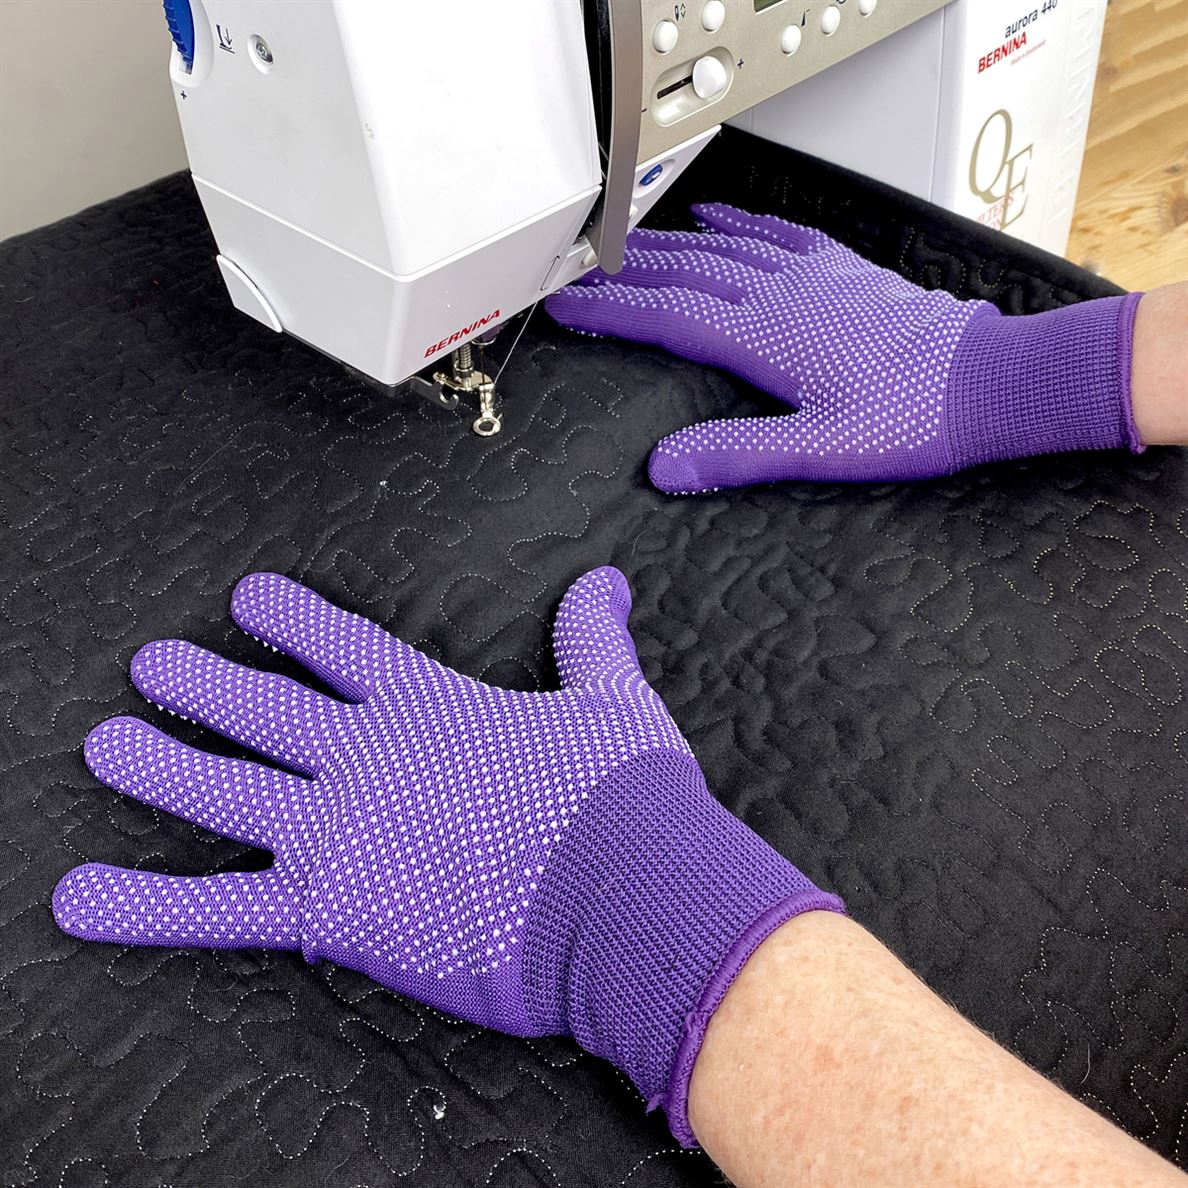 Hold Steady Machine Quilting Gloves in use